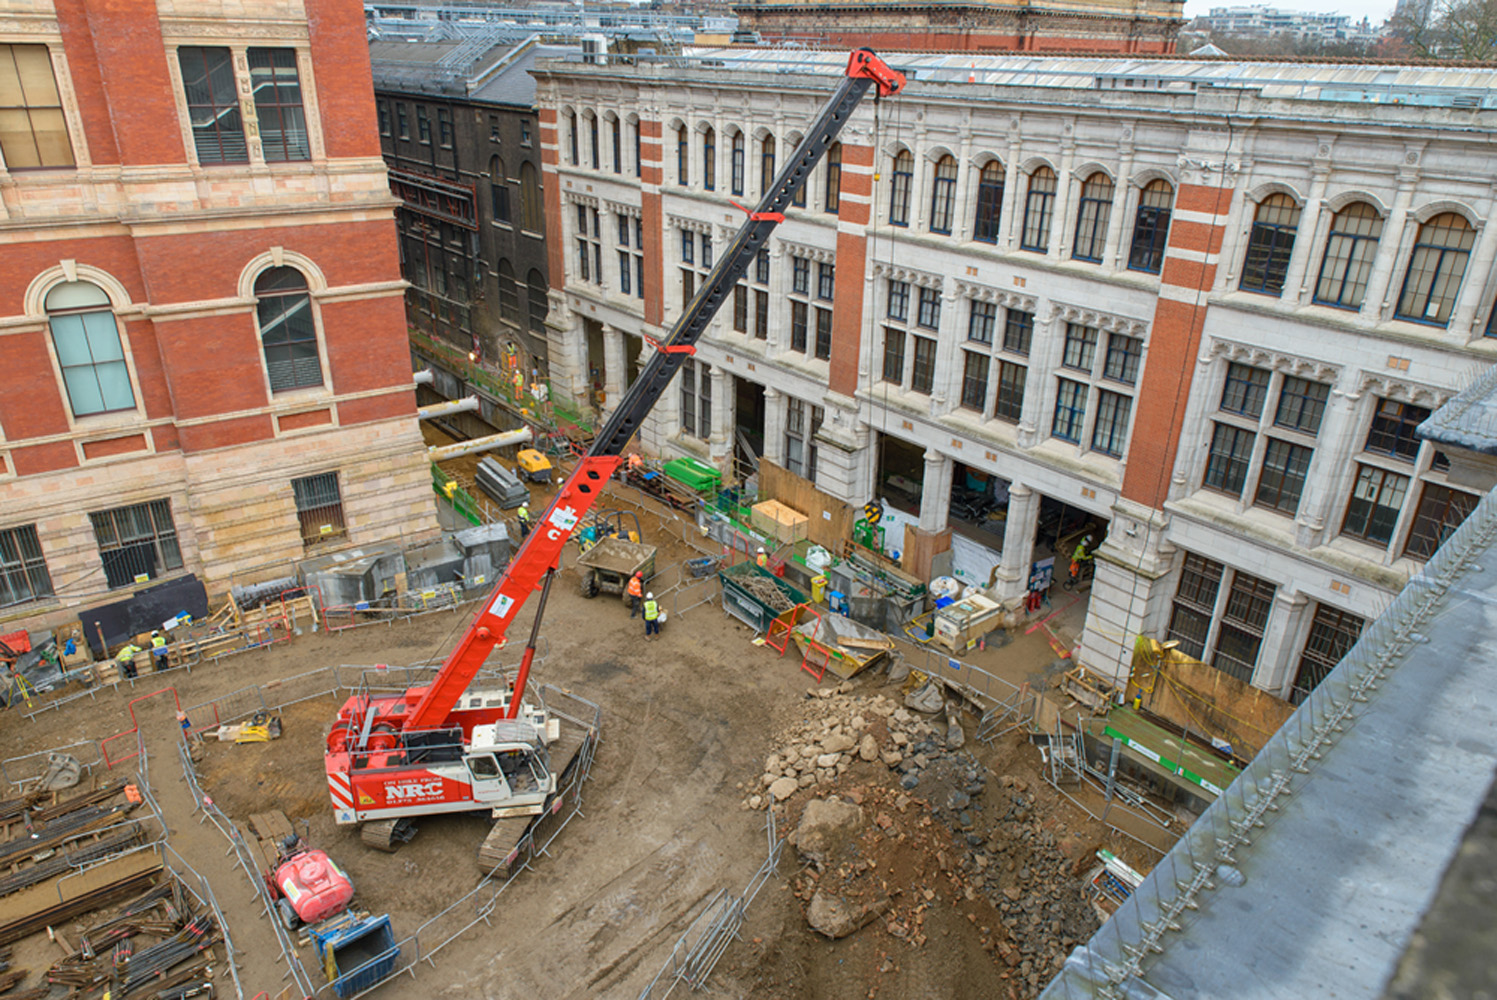    Current construction progress on the Exhibition Road Project site - all disused buildings have been demolished, piling works are complete, and excavation and propping of the site is underway. The three openings in the Western Range (building in the background) will provide a new entrance and lobby for the museum, 2015. © Victoria and Albert Museum, London